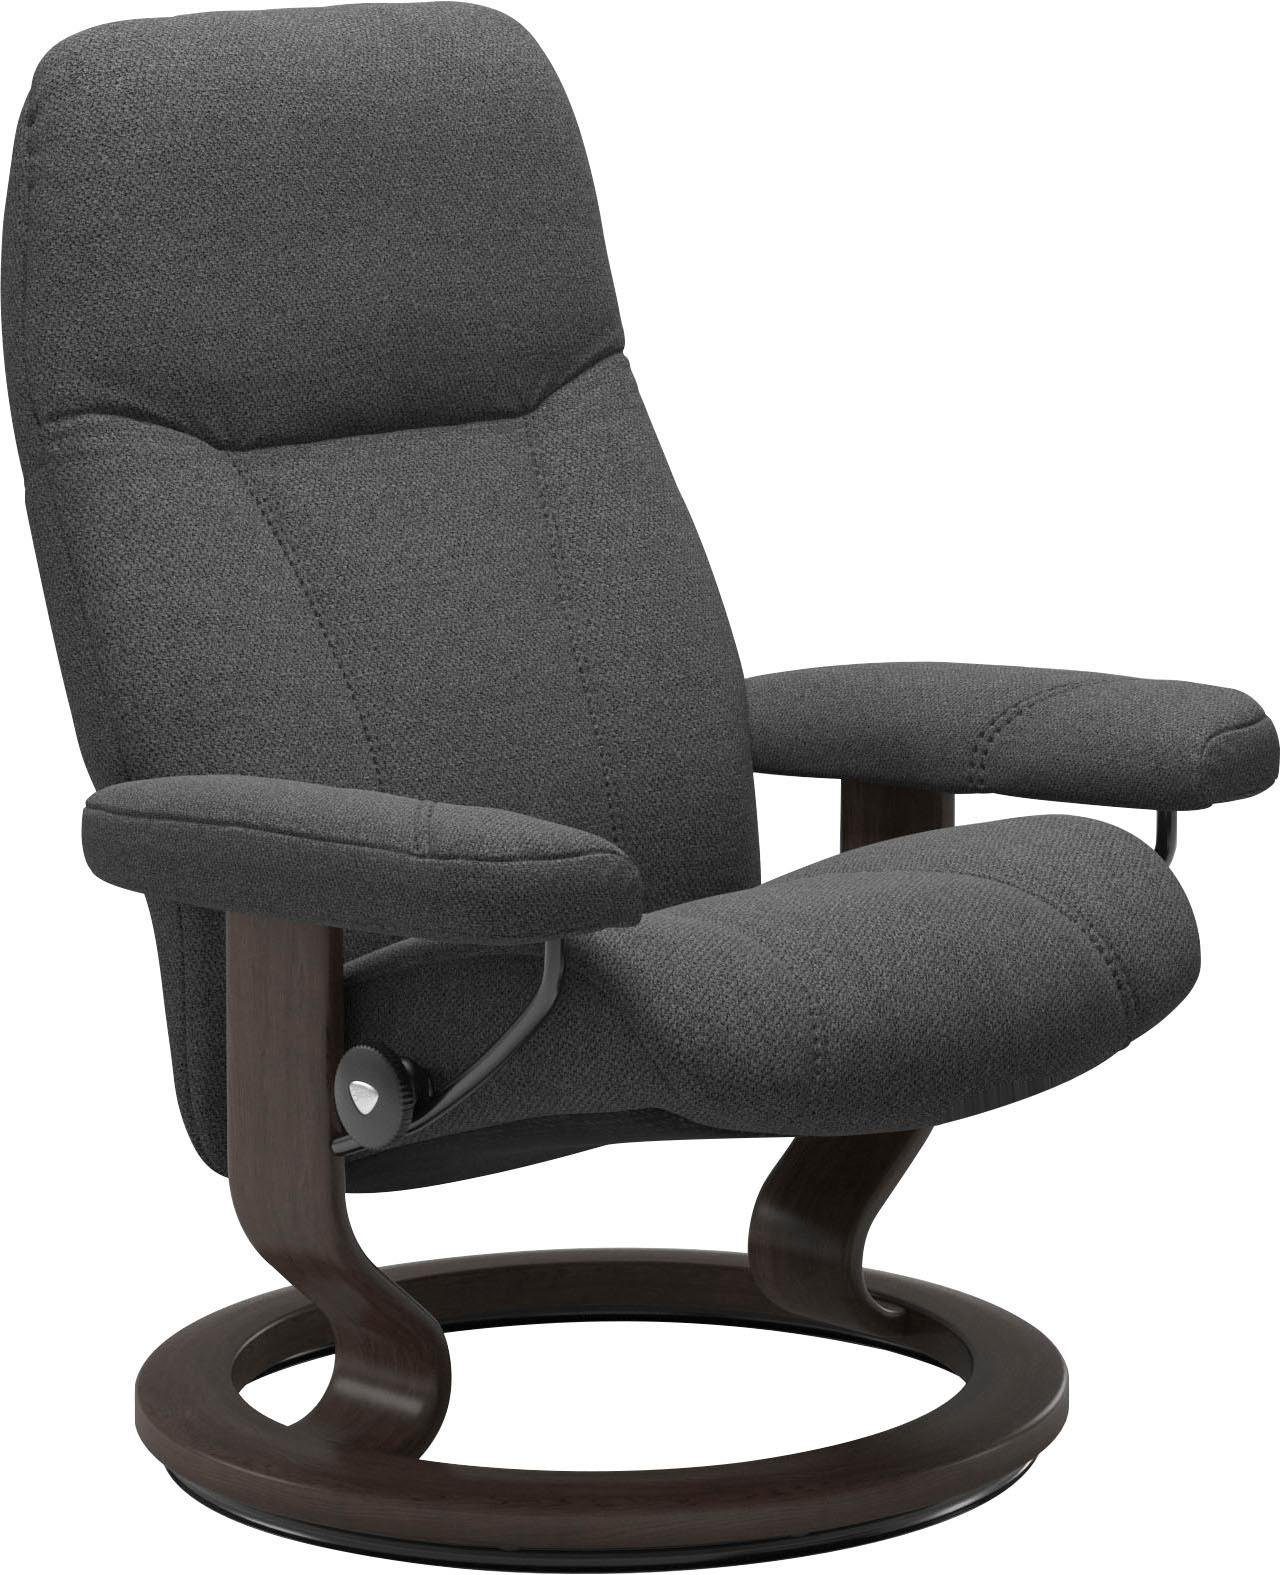 Stressless® Relaxsessel Größe Wenge Gestell L, mit Classic Base, Consul